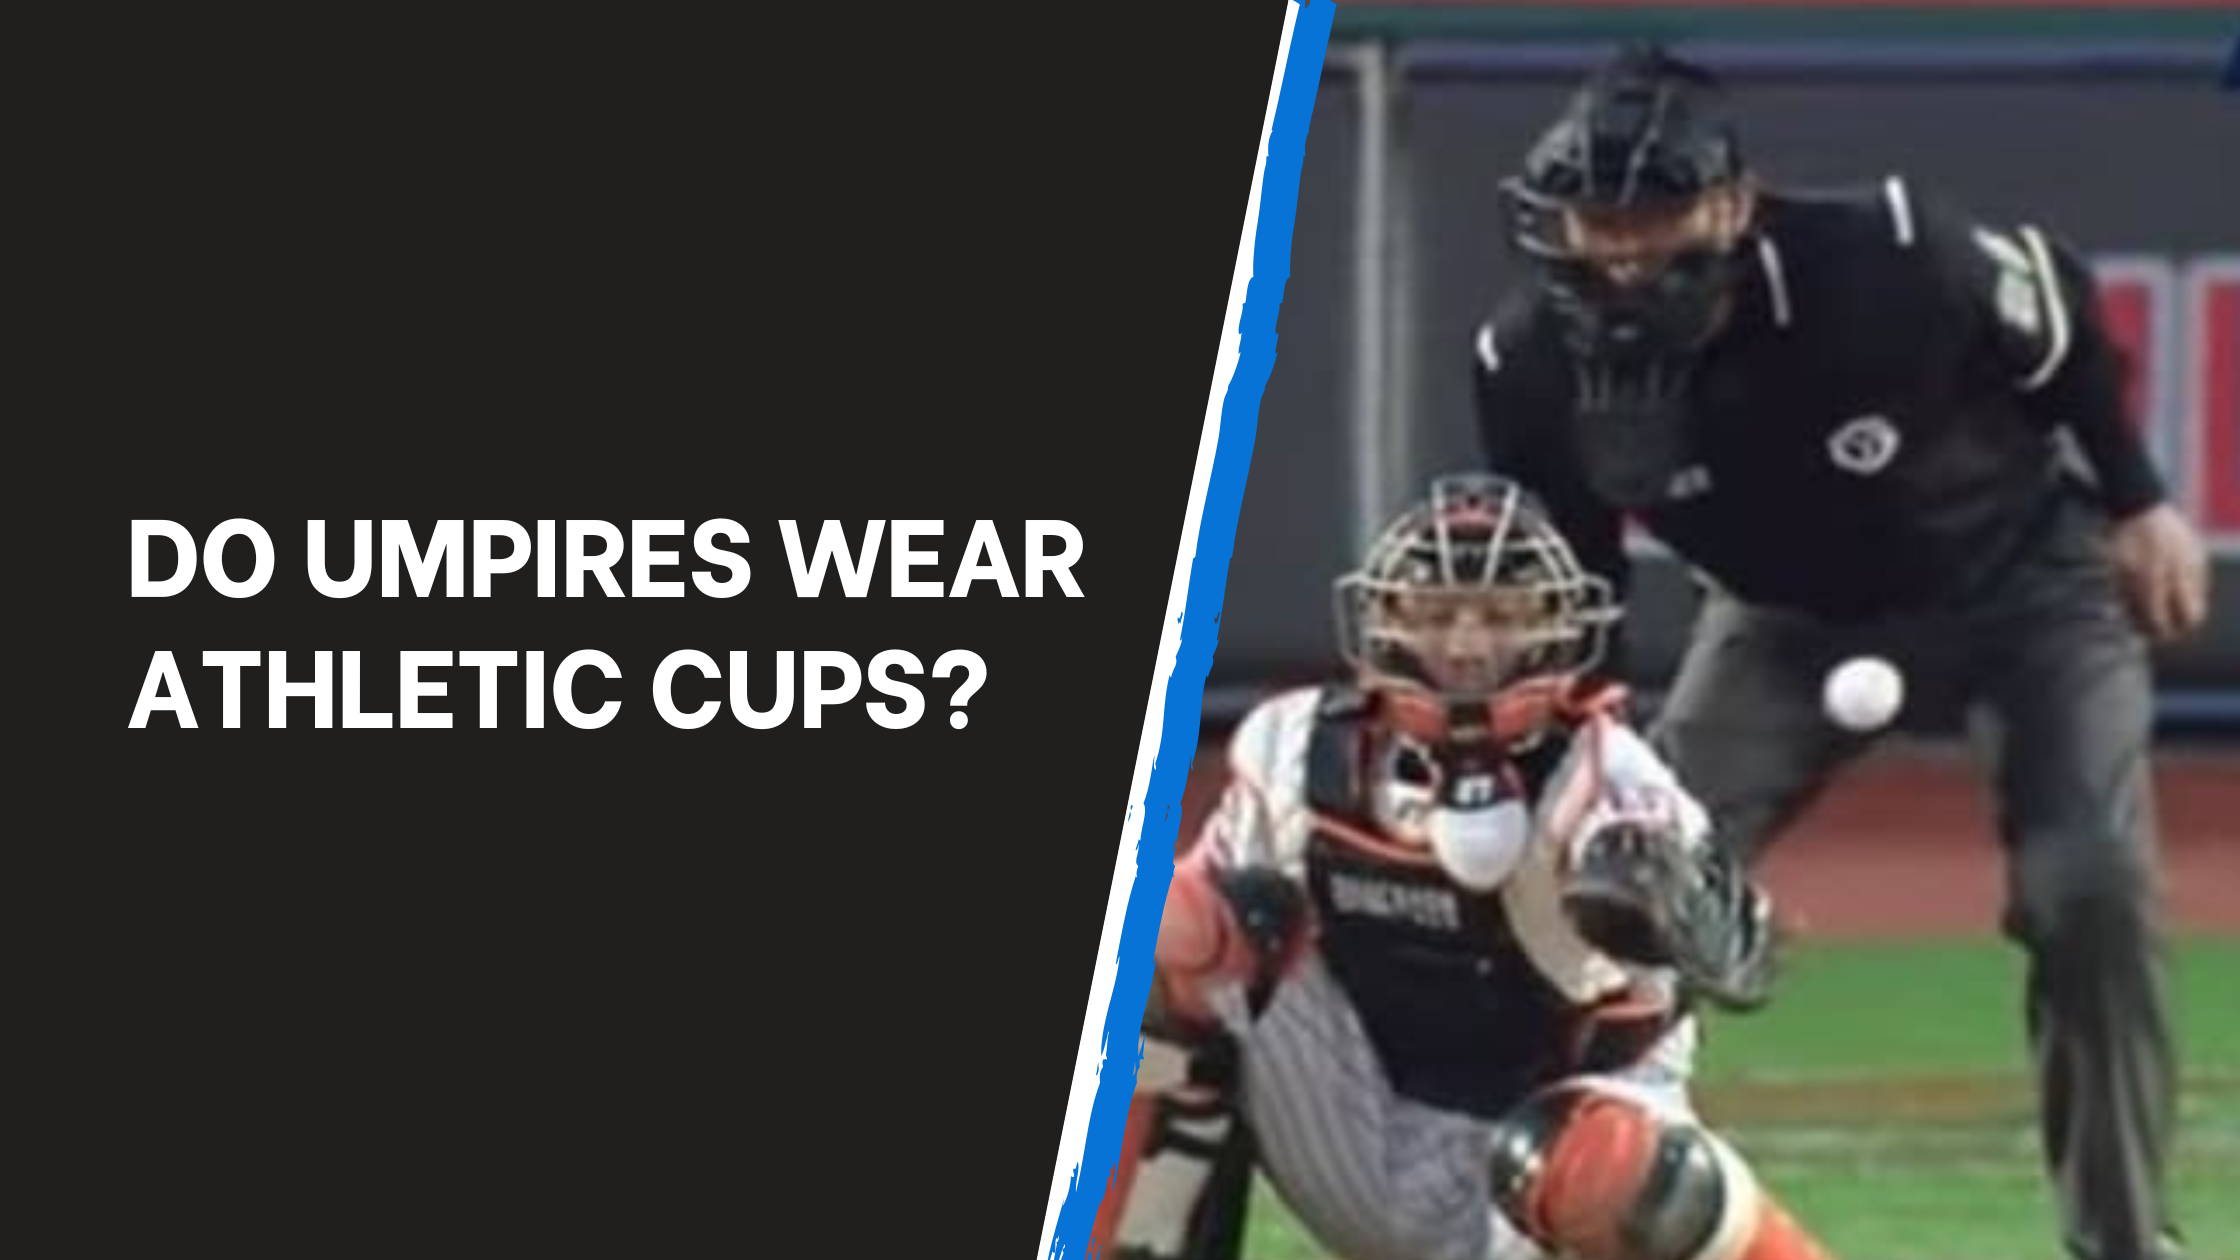 How To Choose An Athletic Cup